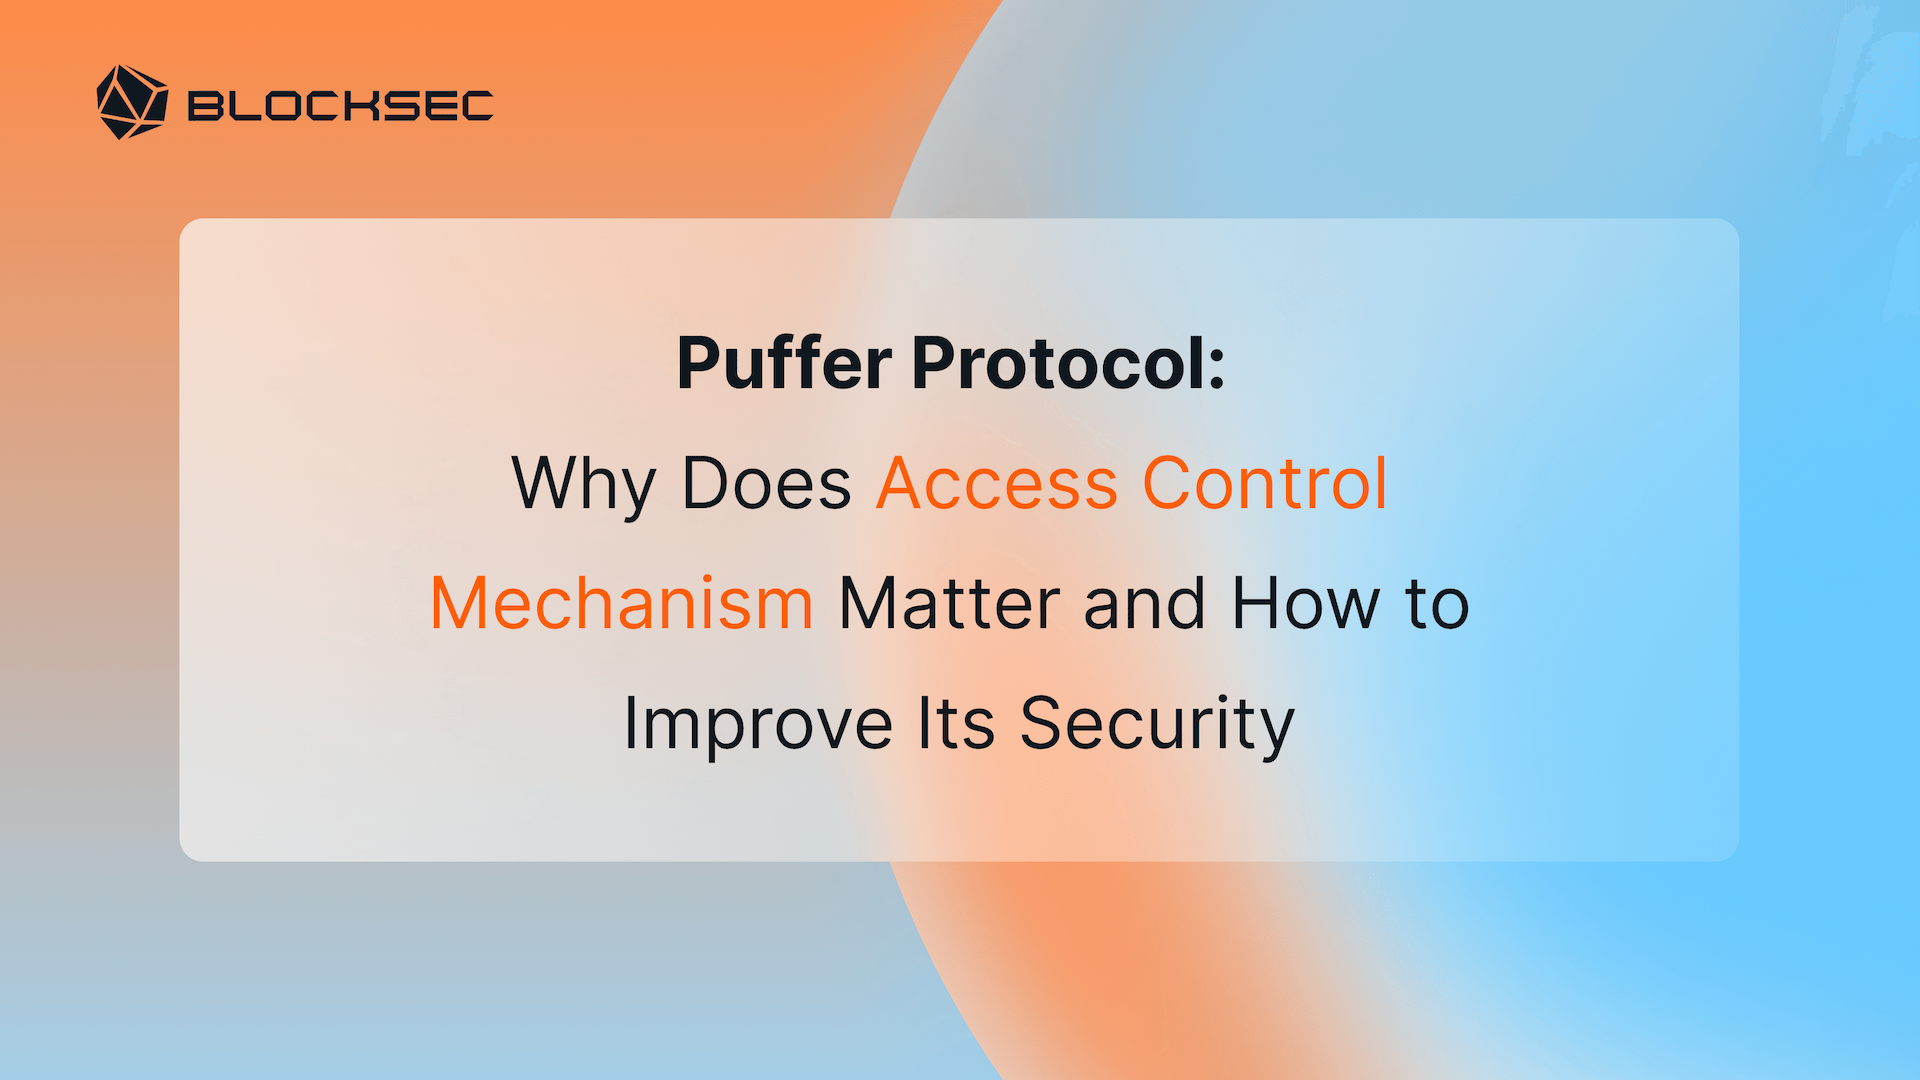 Puffer Protocol: Why Does Access Control Mechanism Matter and How to Improve Its Security